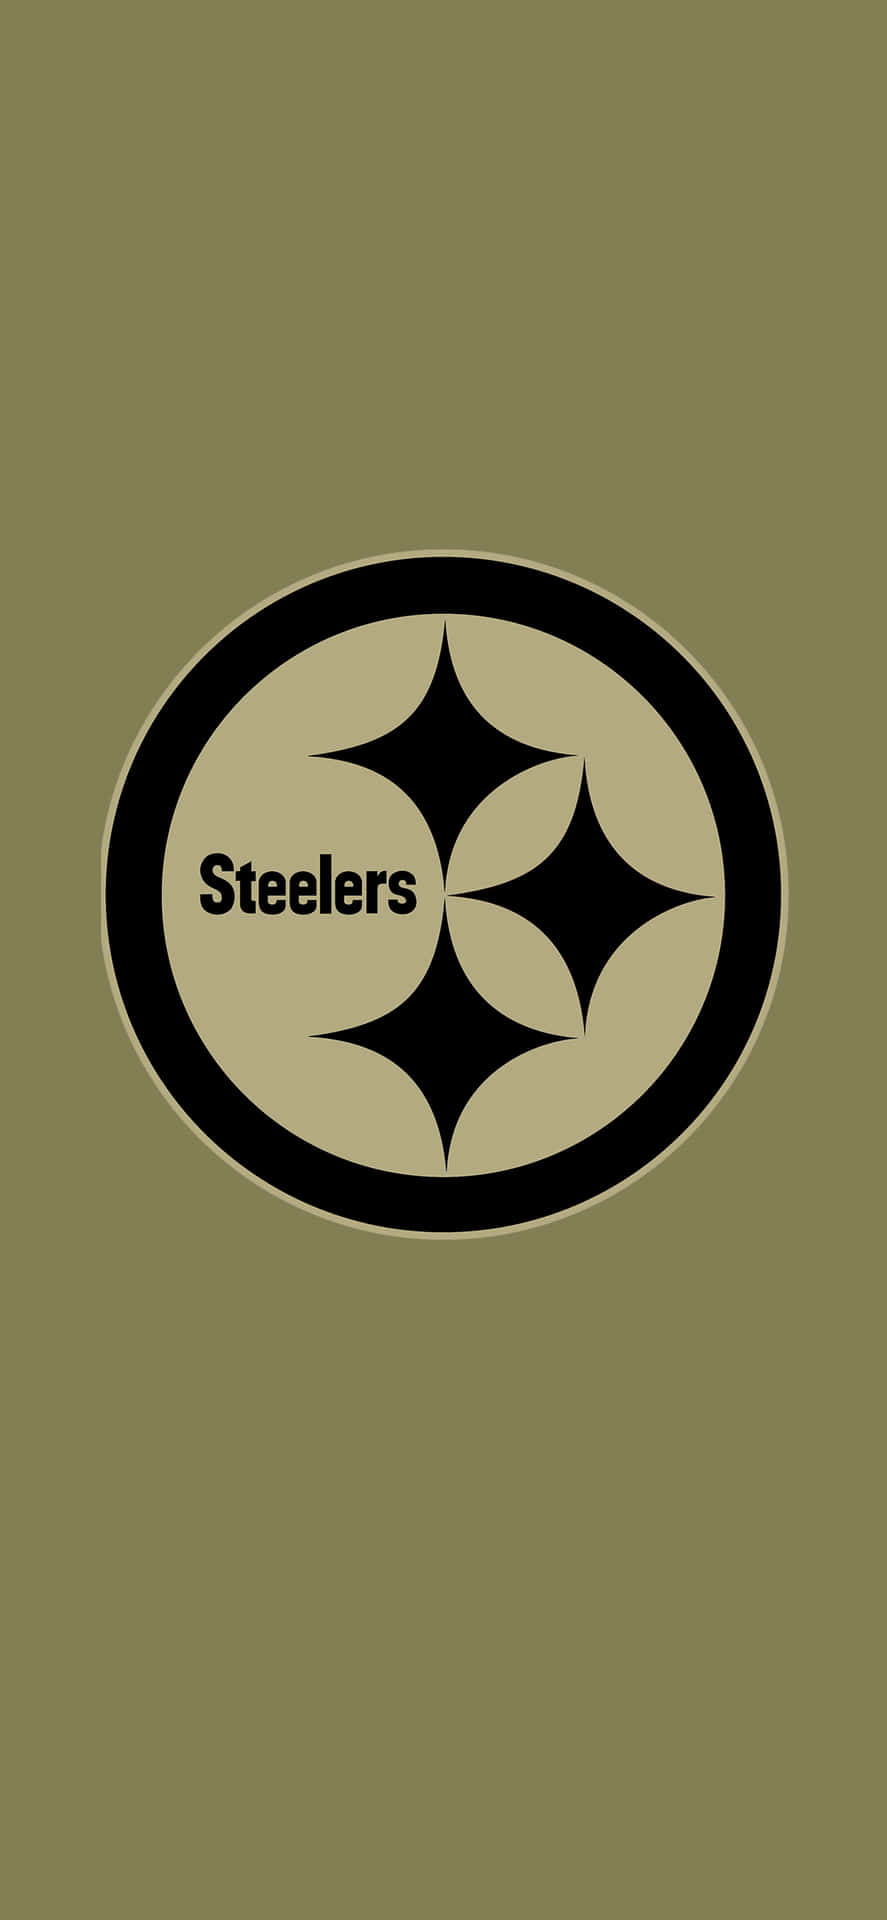 Get the perfect gift for Steelers fans-- the Official Steelers Iphone! Wallpaper